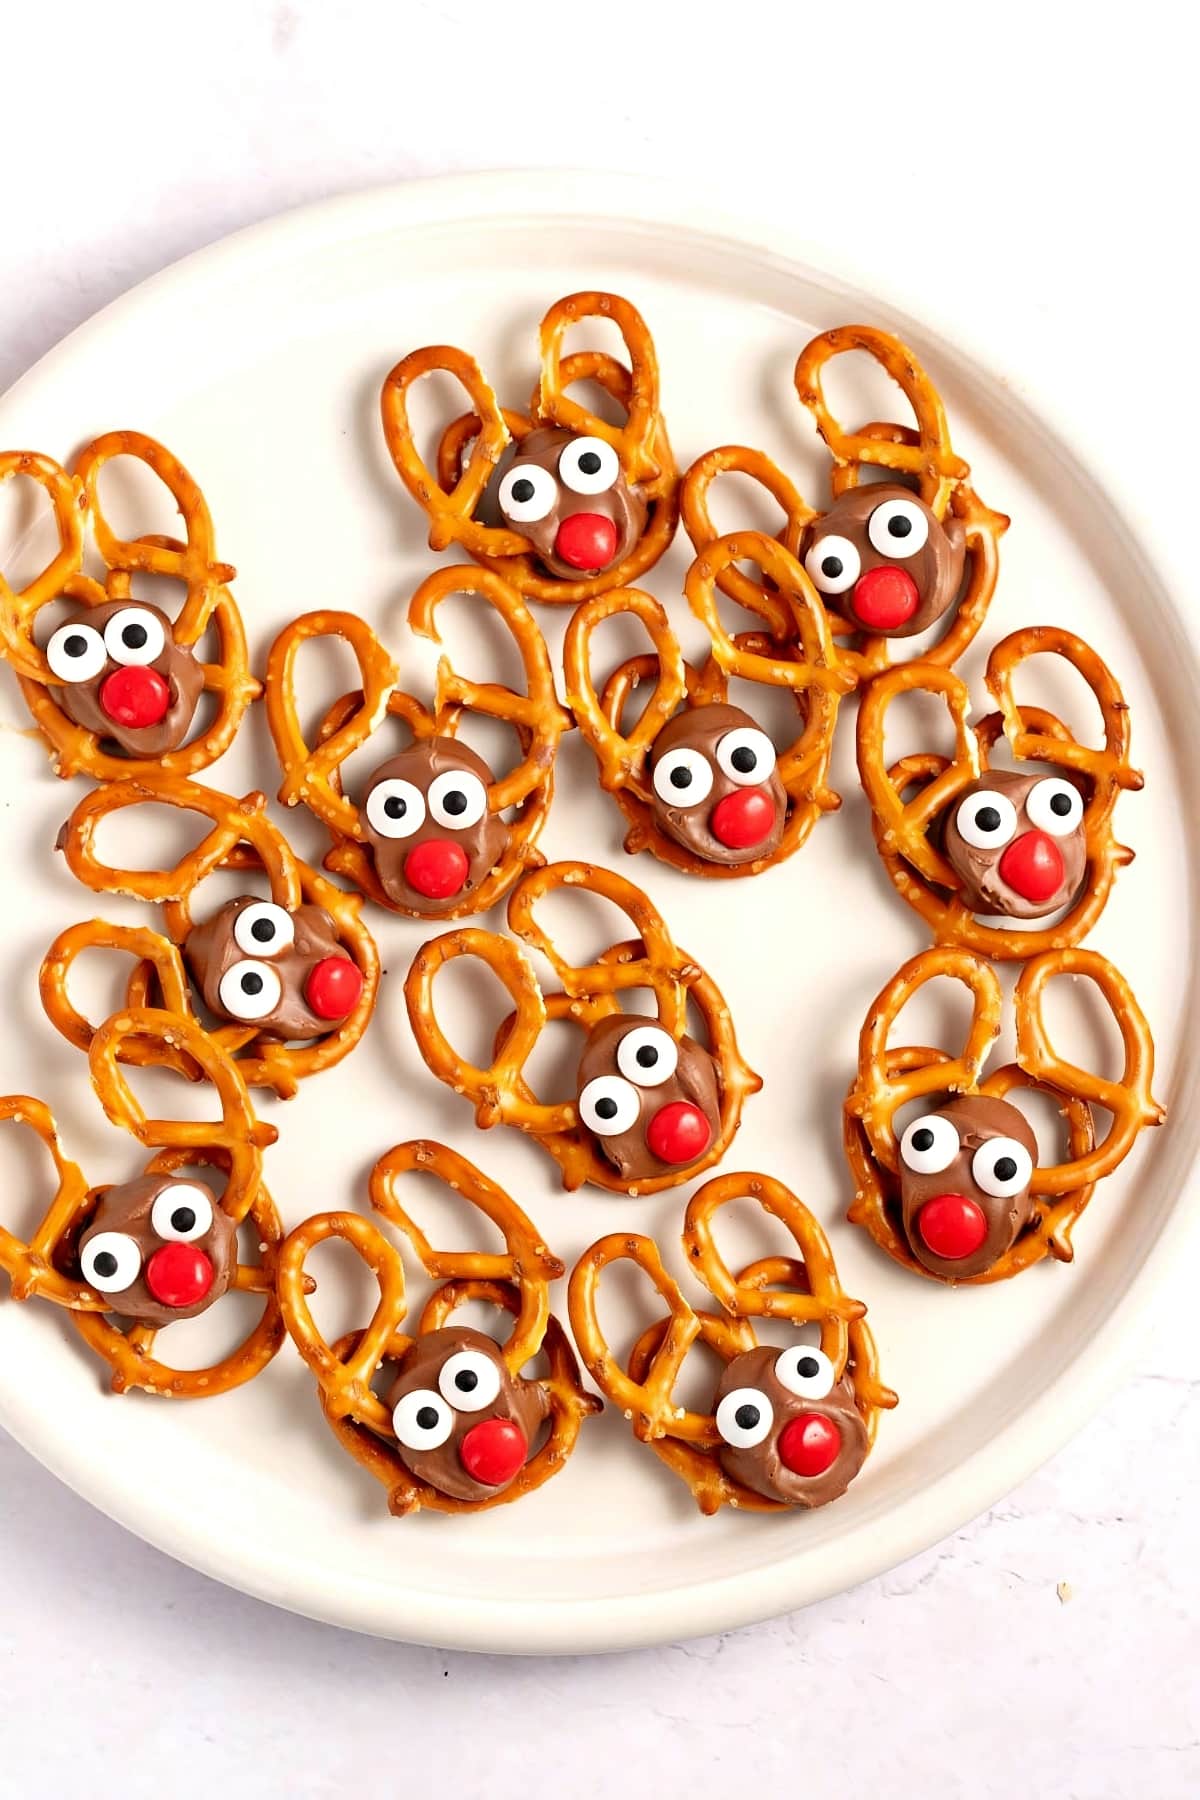 Homemade Reindeer Pretzels with ROLO Chocolates, Eye Candies, and Red Candy Noses